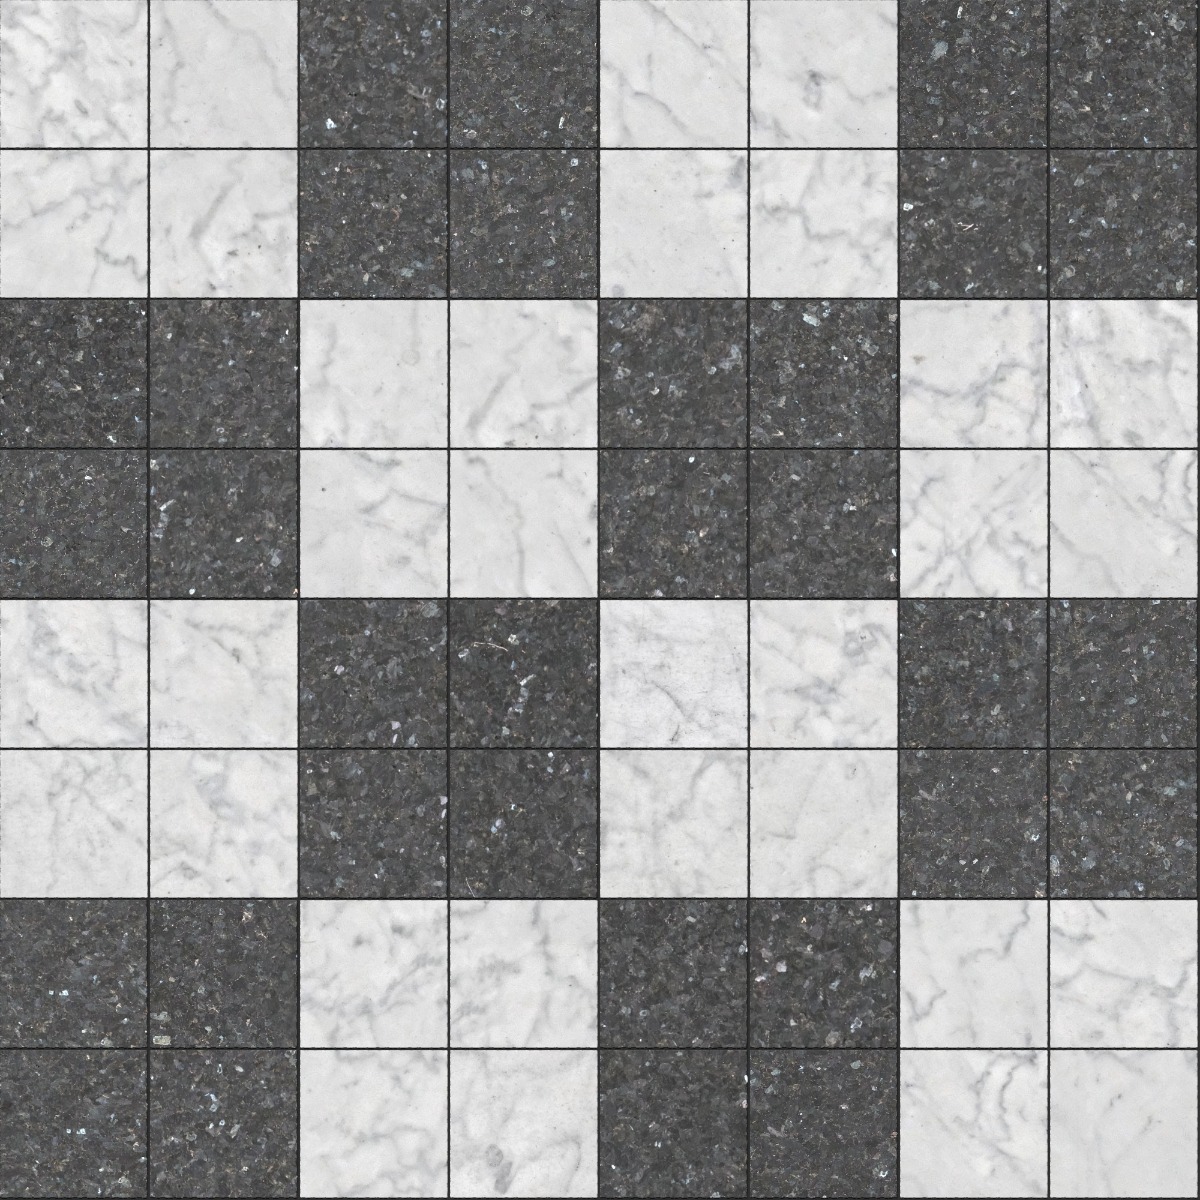 A seamless stone texture with larvikite blocks arranged in a Stack pattern